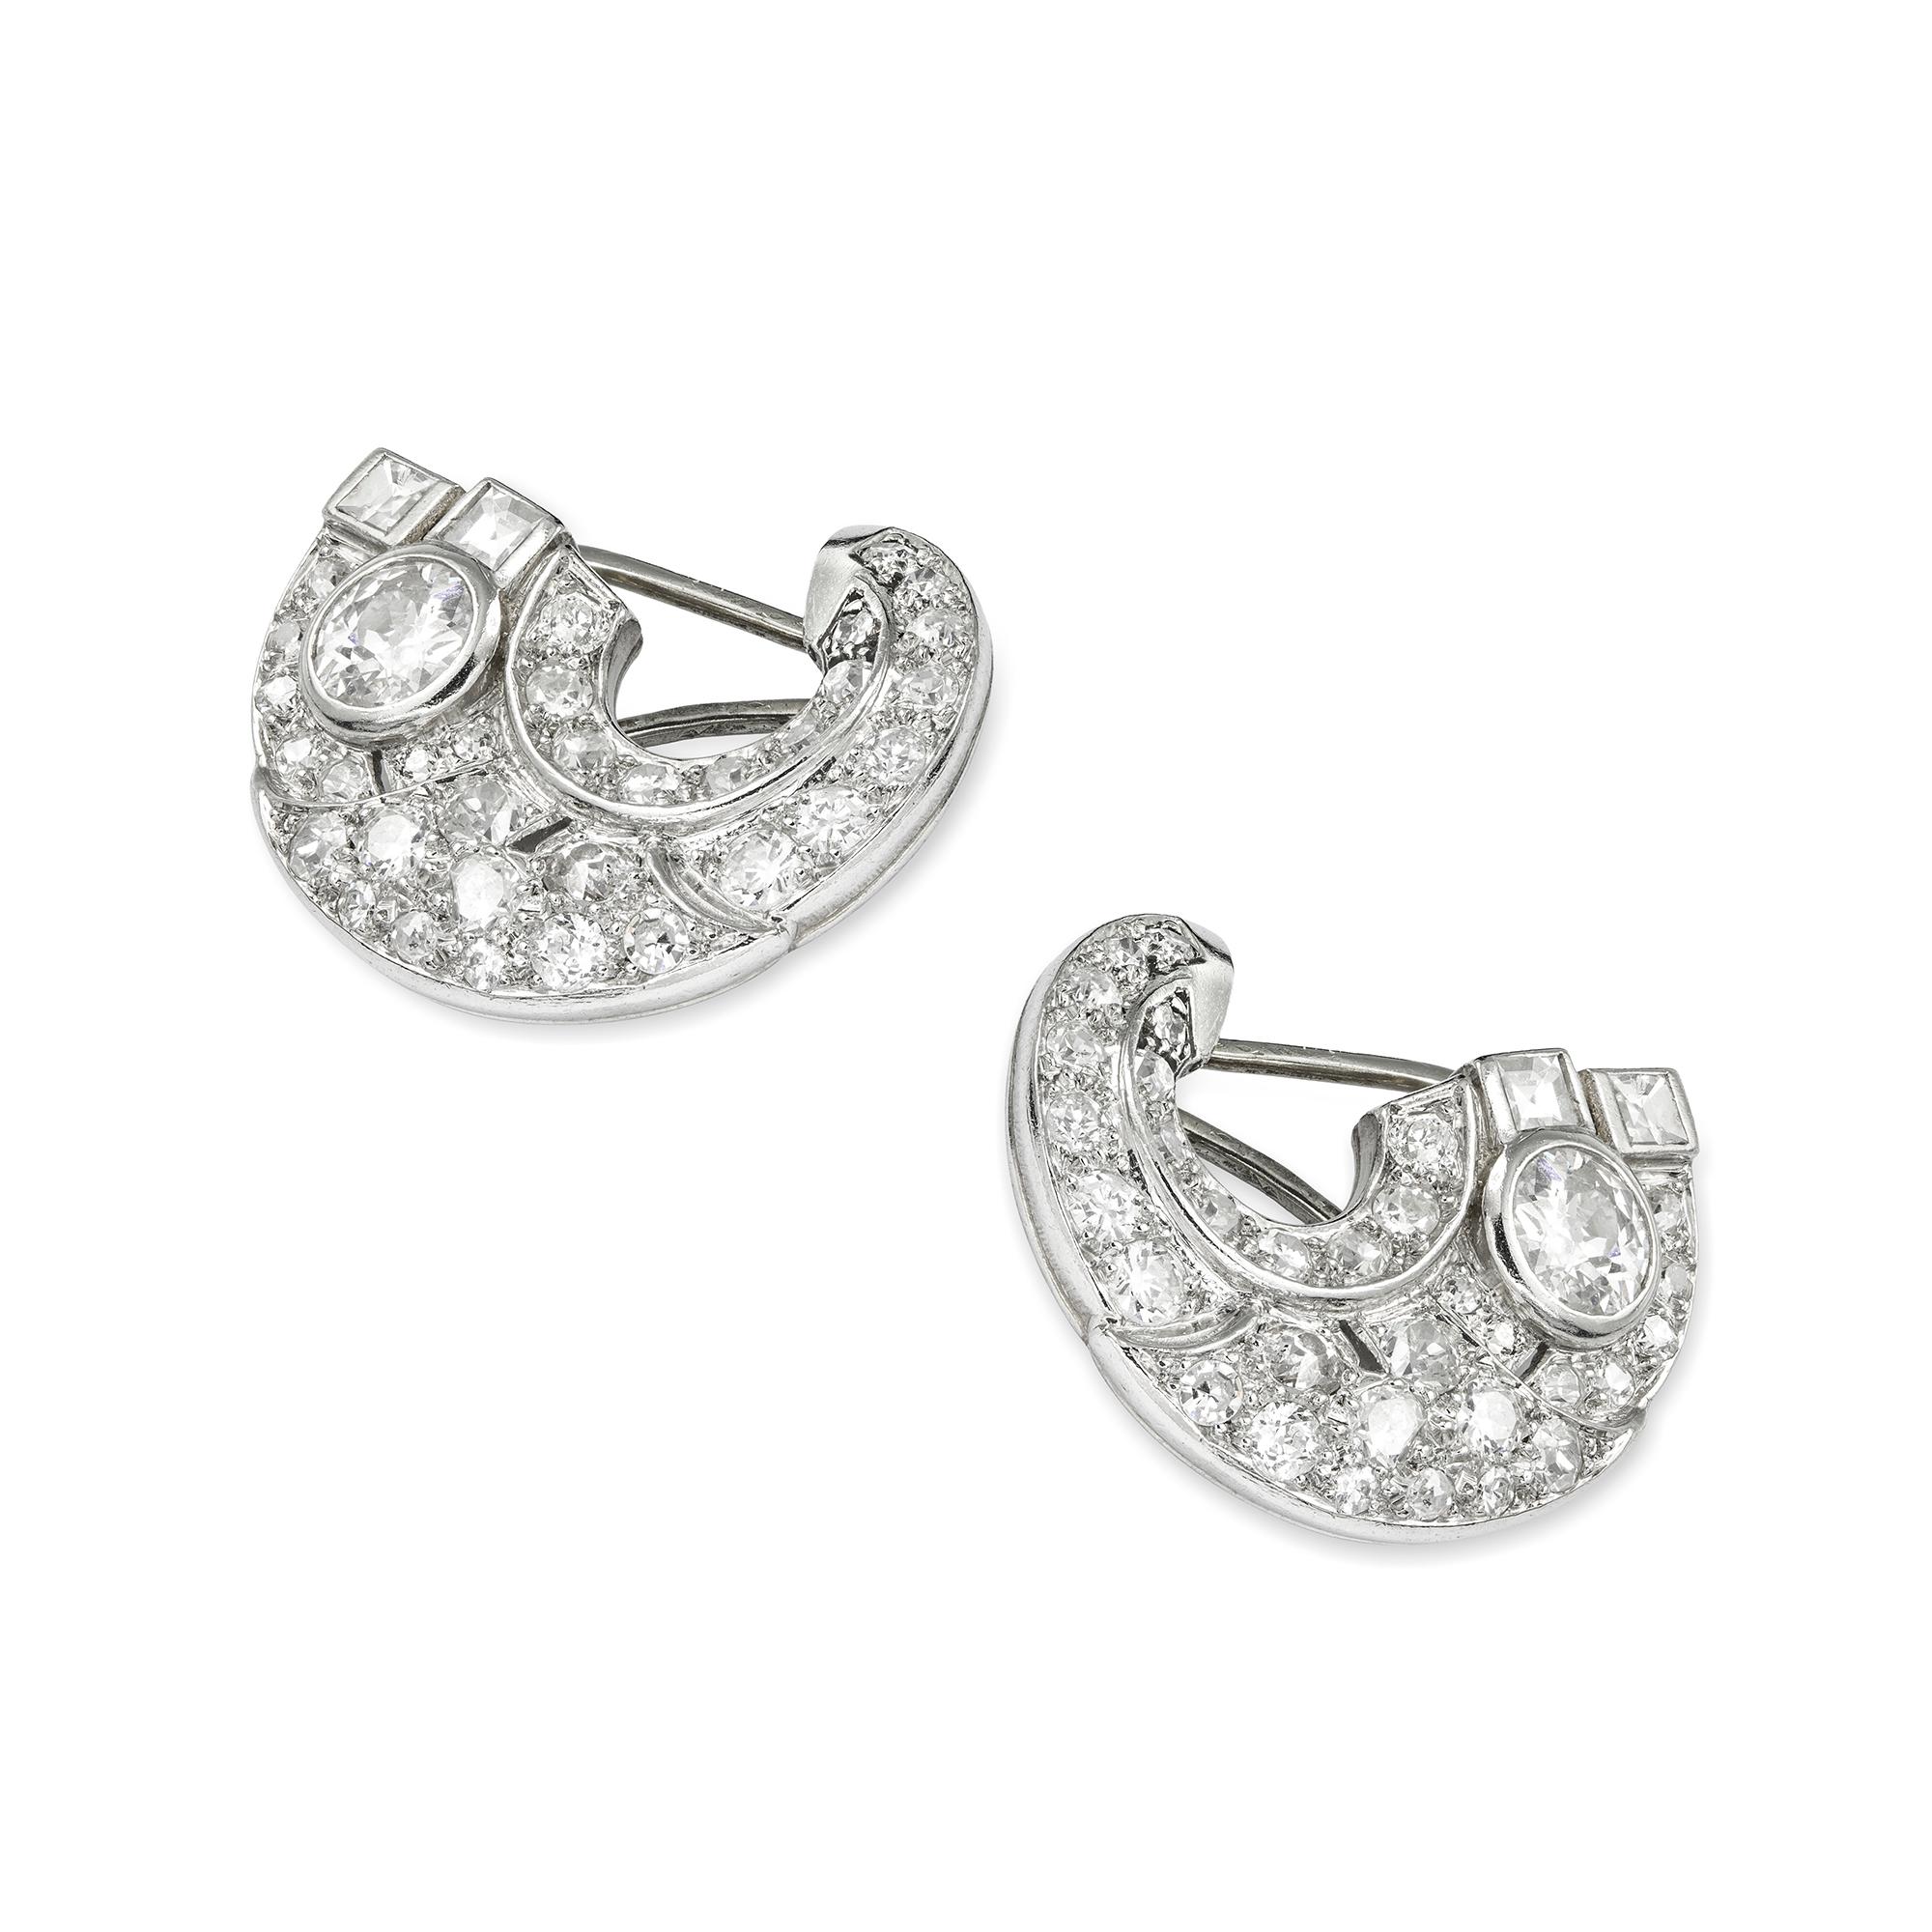 A pair of French Art Deco diamond-set scroll ear clips, each in the form of cornucopia, set throughout with old brilliant-cut and carré-cut diamonds, the diamonds estimated to weigh 3.5 carats in total, all grain and rubover-set in platinum, on peg